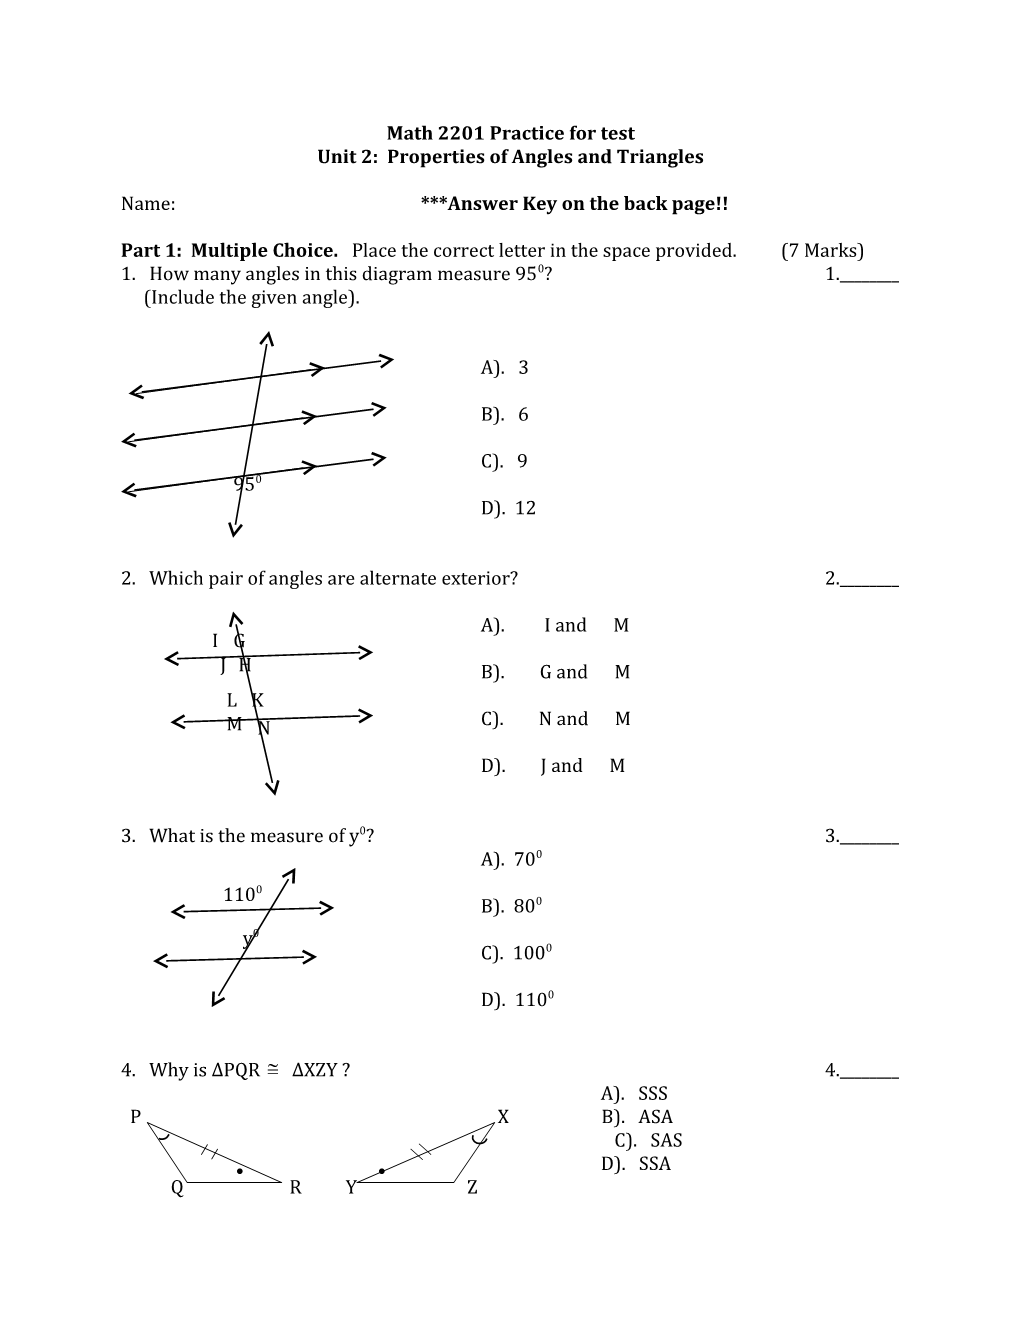 Math 2201 Practice for Test